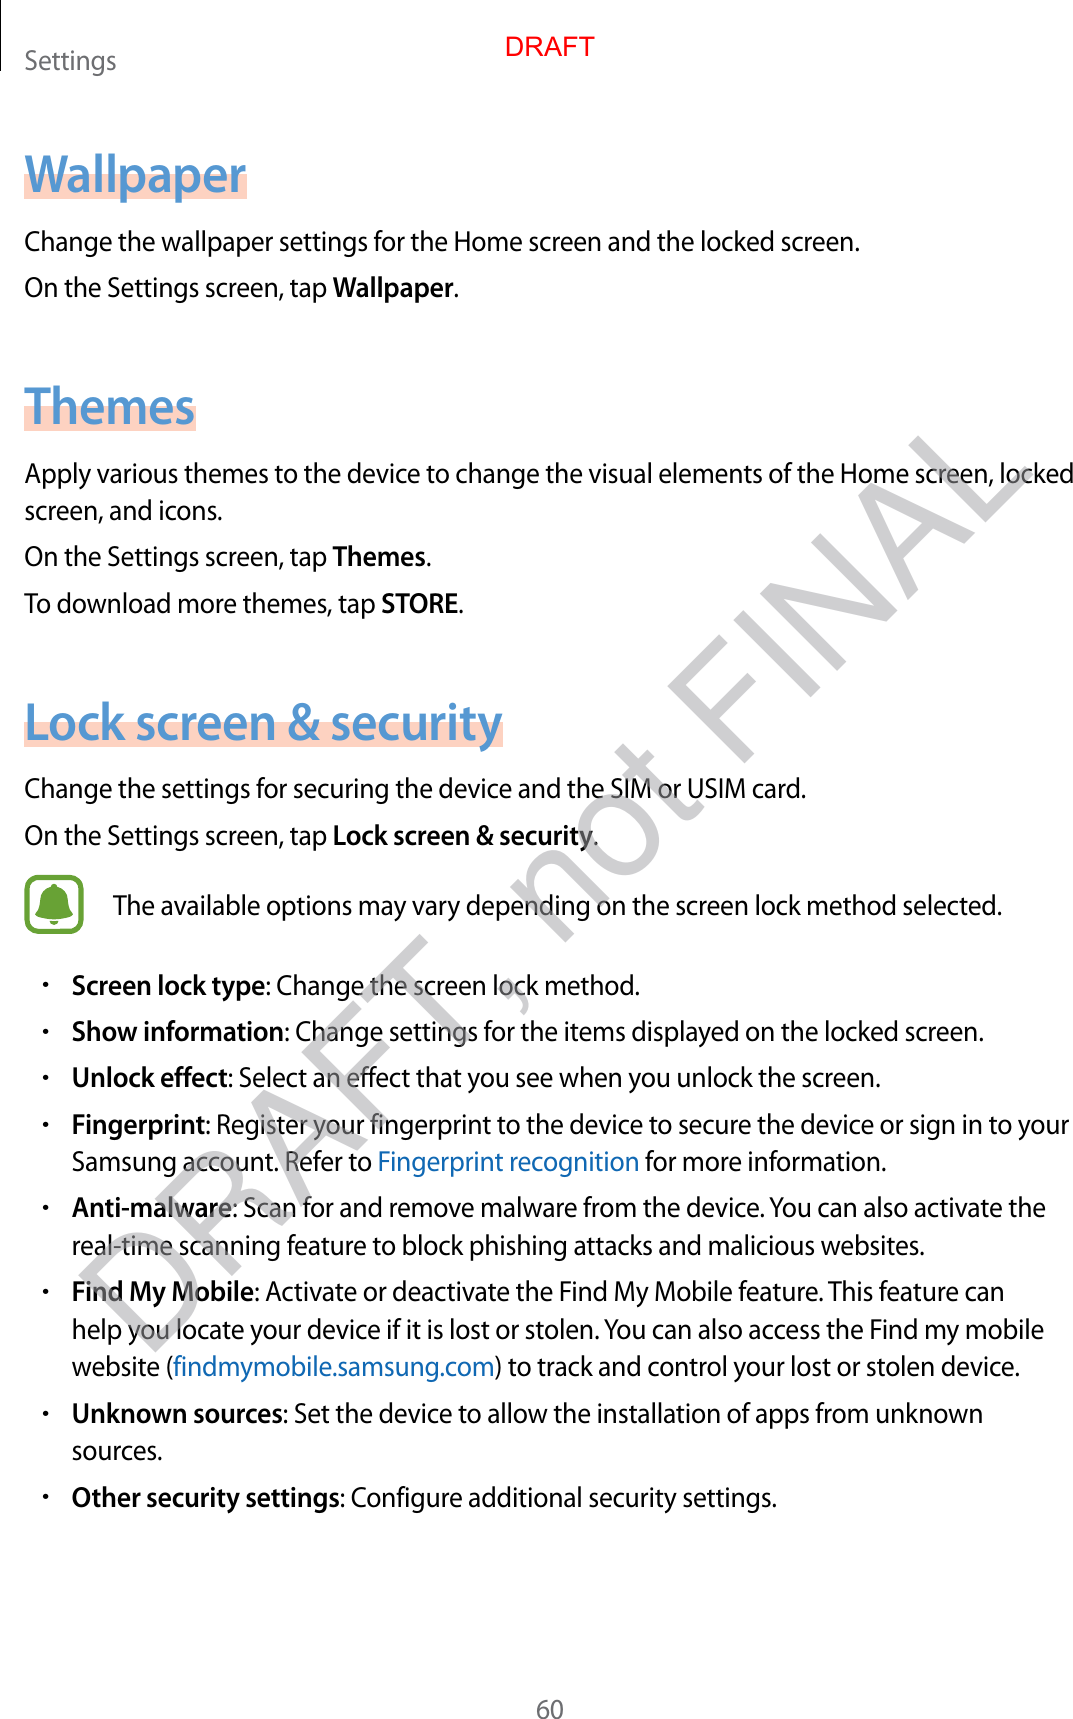 Settings60WallpaperChange the wallpaper settings for the Home screen and the locked screen.On the Settings screen, tap Wallpaper.ThemesApply various themes to the device to change the visual elements of the Home screen, locked screen, and icons.On the Settings screen, tap Themes.To download more themes, tap STORE.Lock screen &amp; securityChange the settings for securing the device and the SIM or USIM card.On the Settings screen, tap Lock screen &amp; security.The available options may vary depending on the screen lock method selected.•Screen lock type: Change the screen lock method.•Show information: Change settings for the items displayed on the locked screen.•Unlock effect: Select an effect that you see when you unlock the screen.•Fingerprint: Register your fingerprint to the device to secure the device or sign in to your Samsung account. Refer to Fingerprint recognition for more information.•Anti-malware: Scan for and remove malware from the device. You can also activate the real-time scanning feature to block phishing attacks and malicious websites.•Find My Mobile: Activate or deactivate the Find My Mobile feature. This feature can help you locate your device if it is lost or stolen. You can also access the Find my mobile website (findmymobile.samsung.com) to track and control your lost or stolen device.•Unknown sources: Set the device to allow the installation of apps from unknown sources.•Other security settings: Configure additional security settings.DRAFTDRAFT, not FINAL